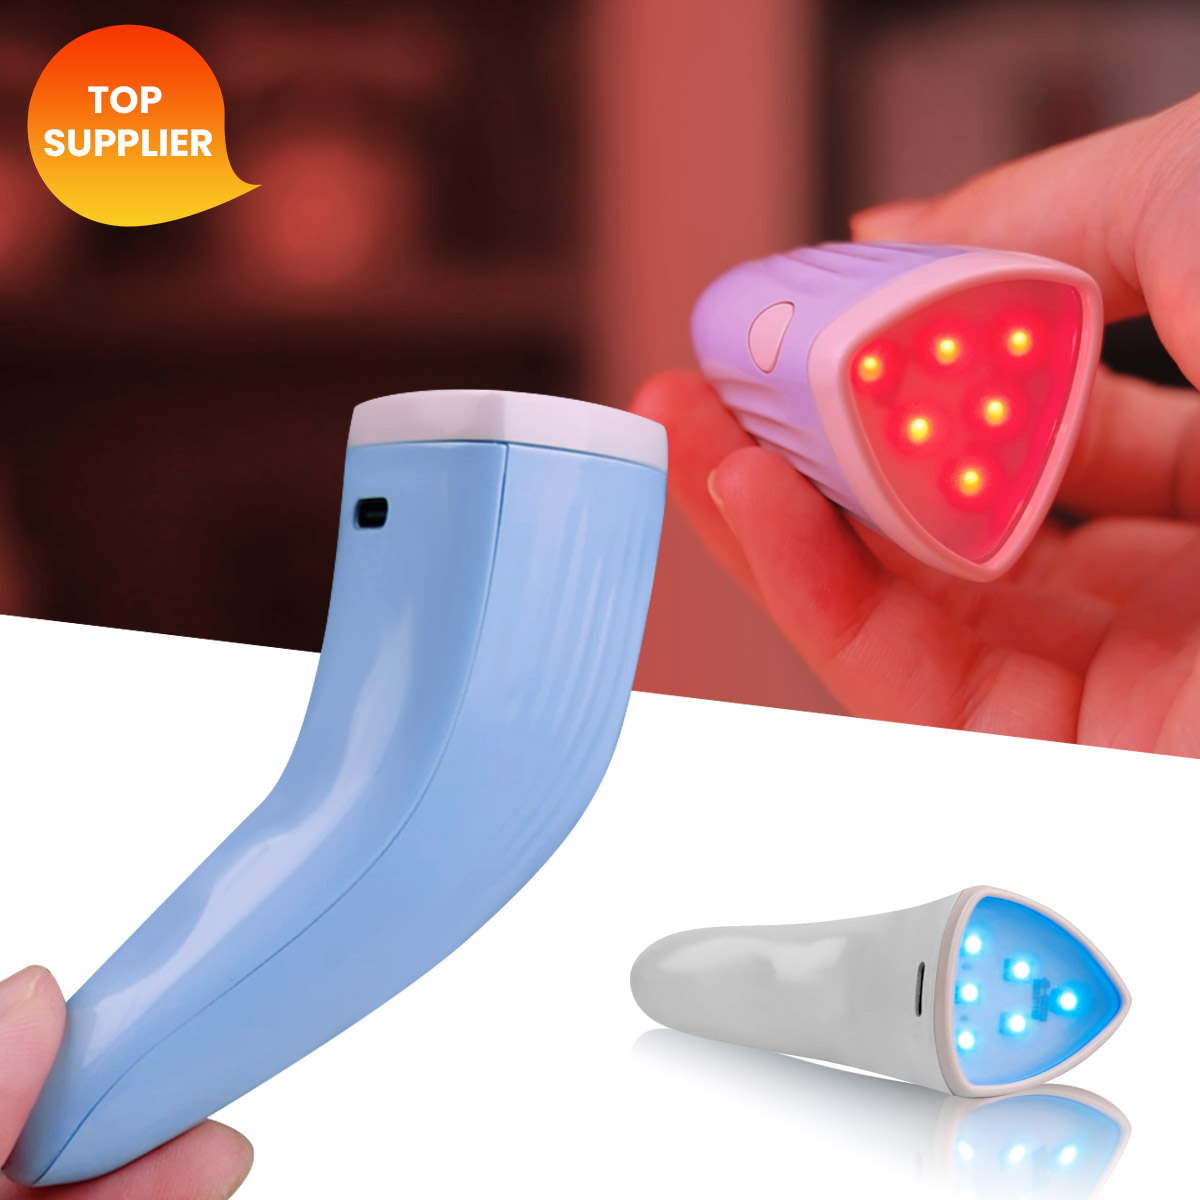  RL05-G  Tiny&Effective Red+Blue LightTherapy Skin Care Device